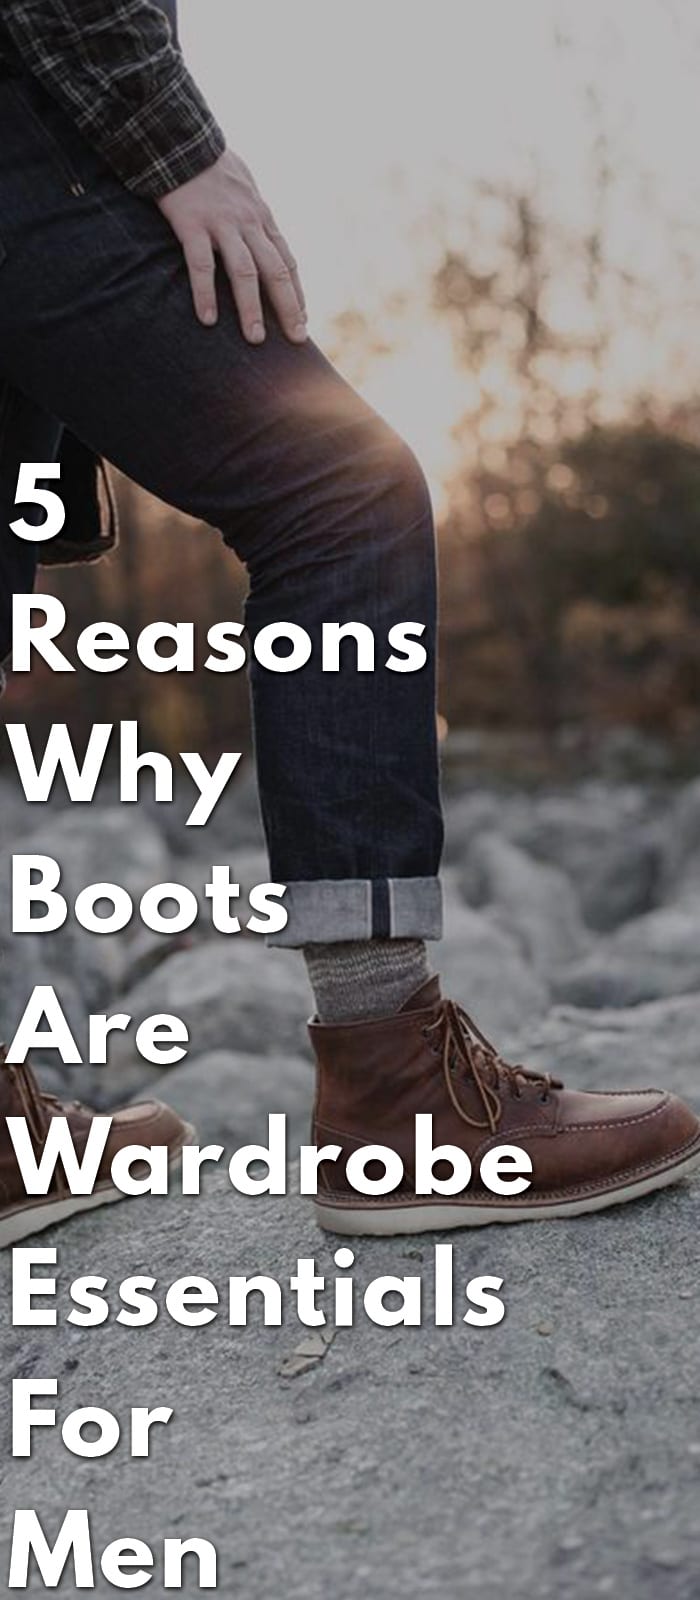 5-Reasons-Why-Boots-Are-Wardrobe-Essentials-For-Men